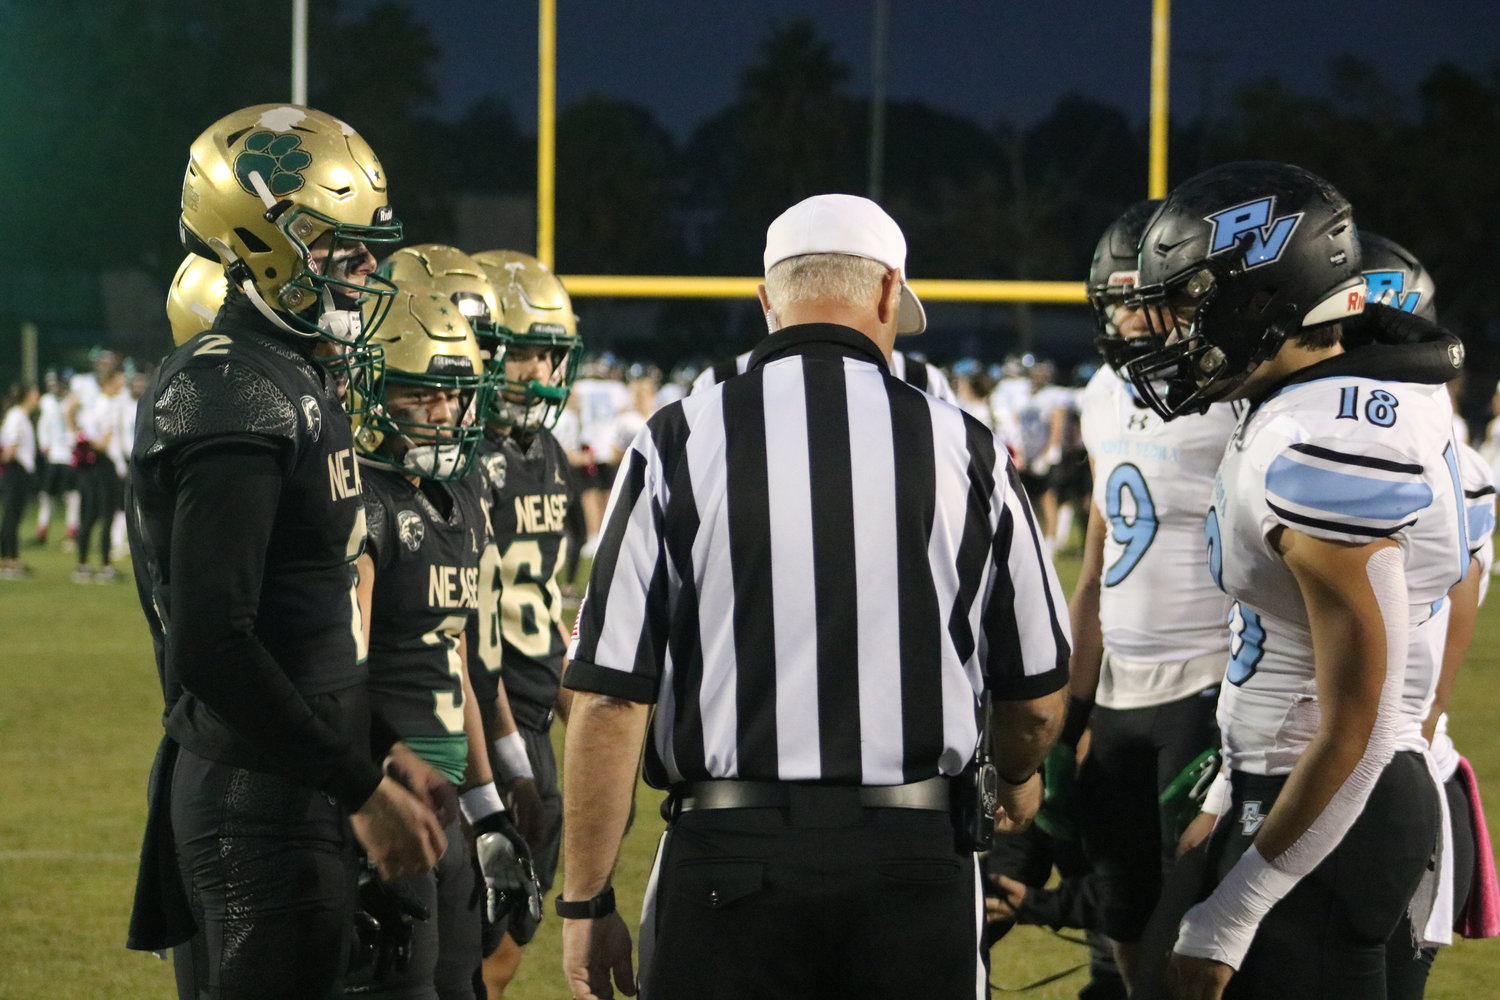 Captains for both teams meet at midfield for the coin toss prior to the showdown.